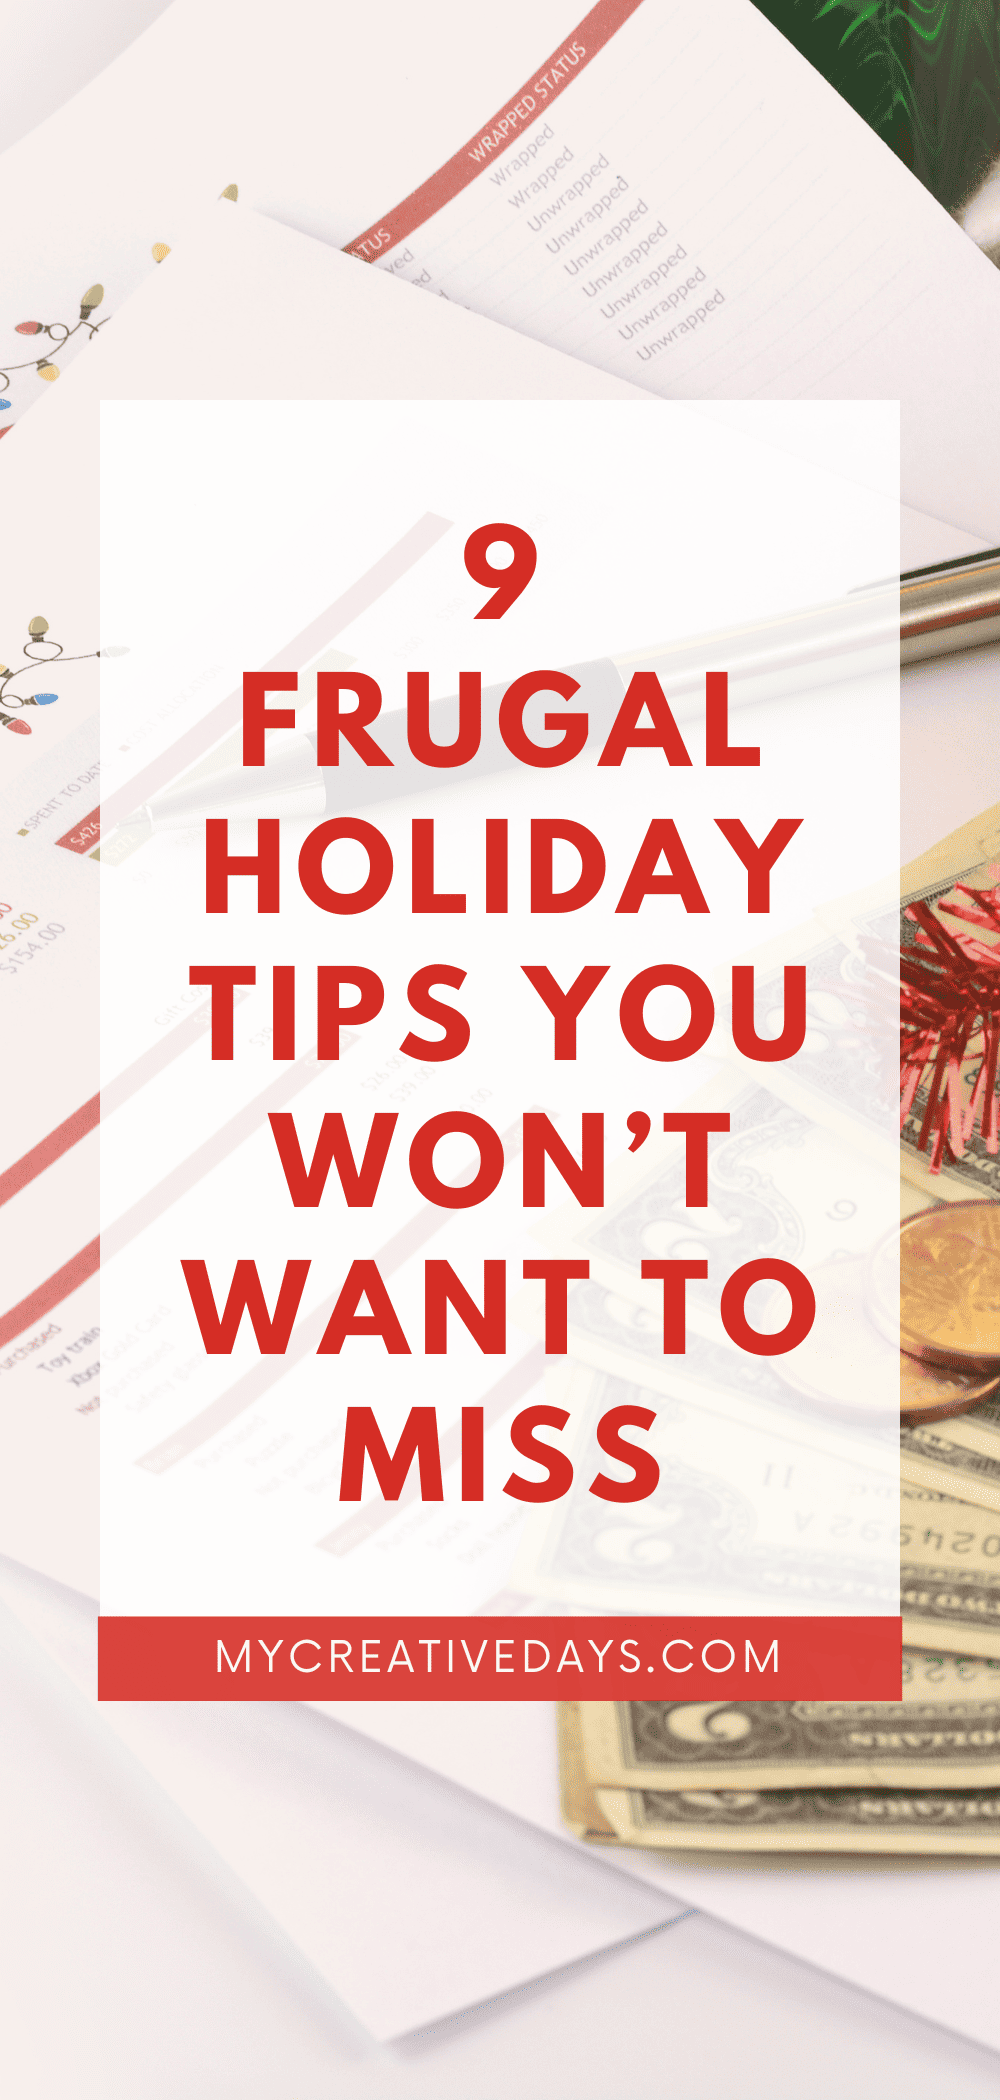 Discover 9 Frugal Holiday Tips that let you celebrate without overspending. Make the most of the festive season without breaking the bank.